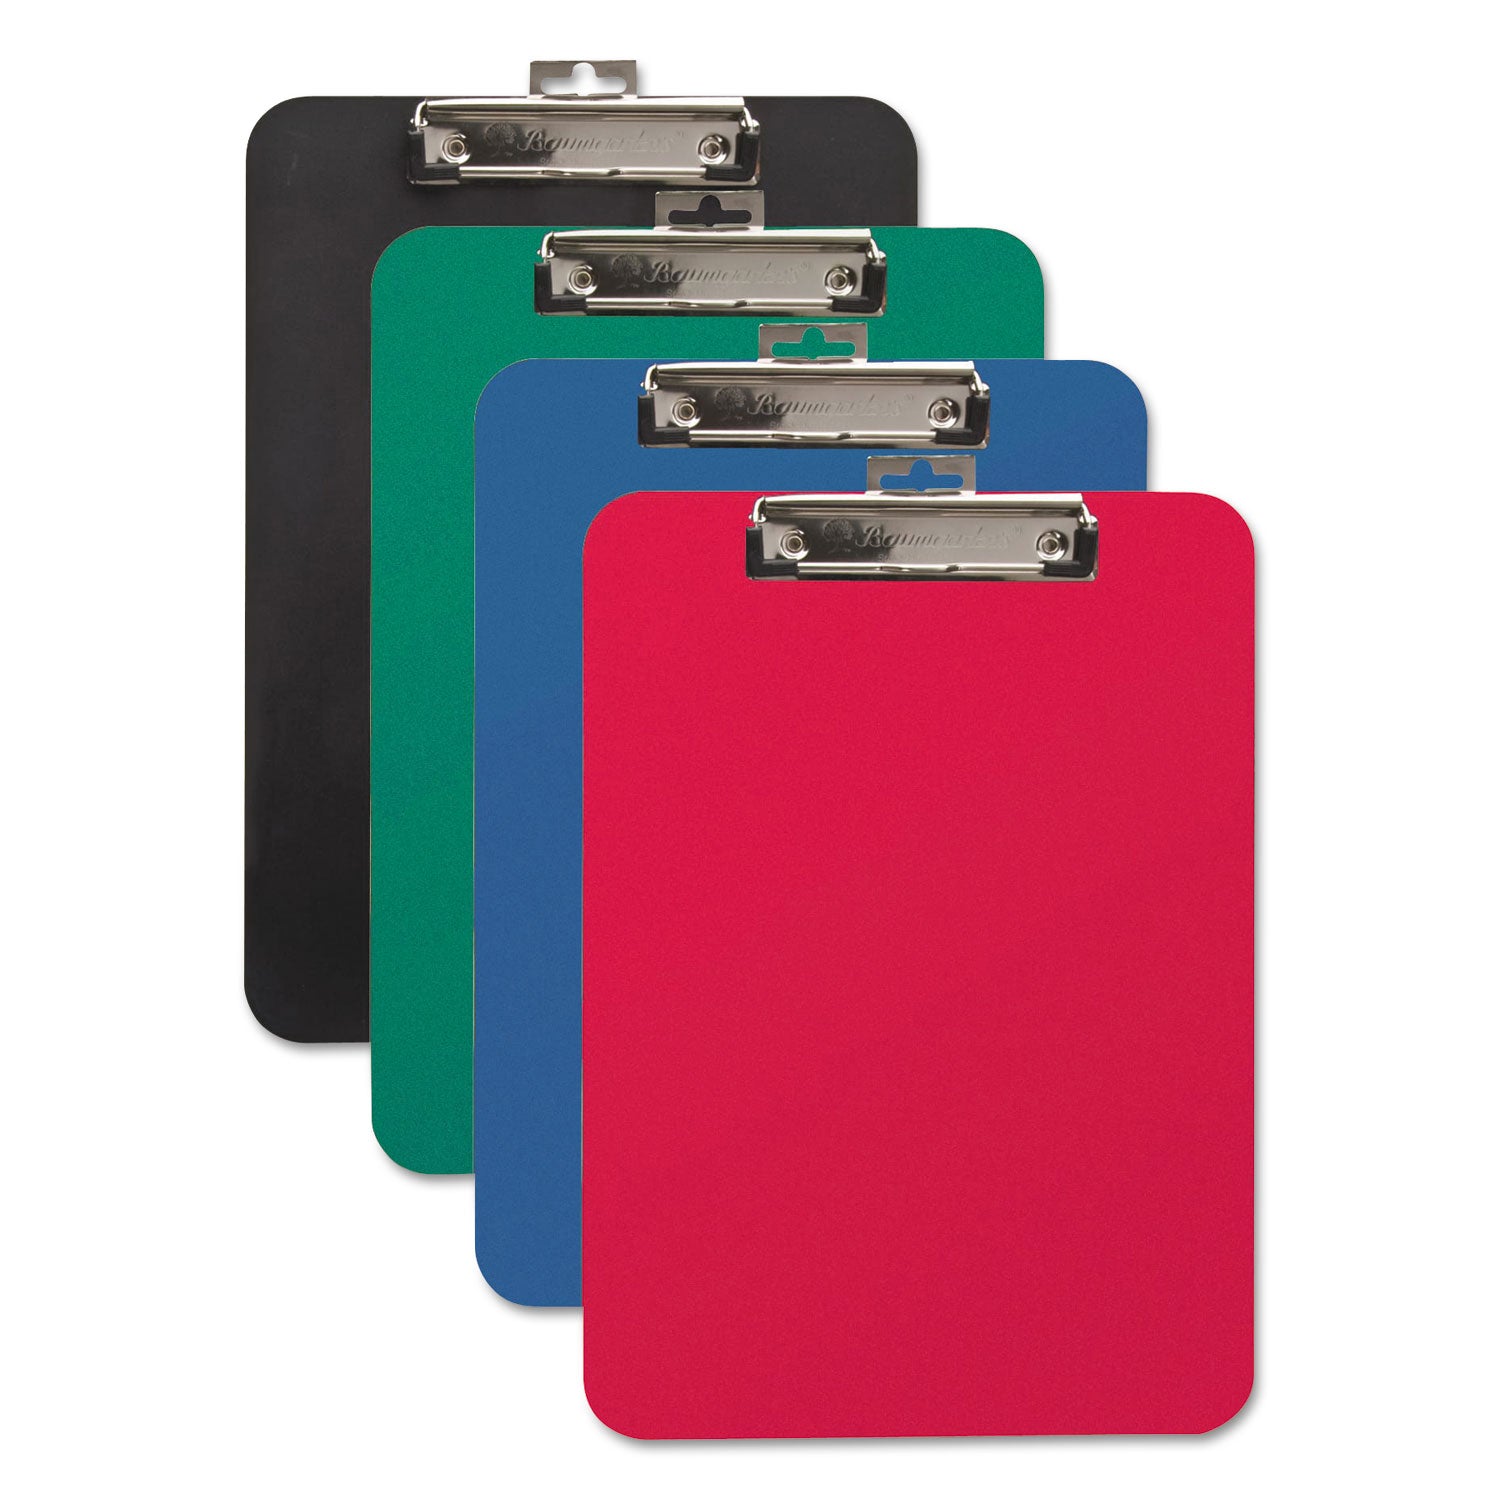 Unbreakable Recycled Clipboard, 0.25" Clip Capacity, Holds 8.5 x 11 Sheets, Green - 